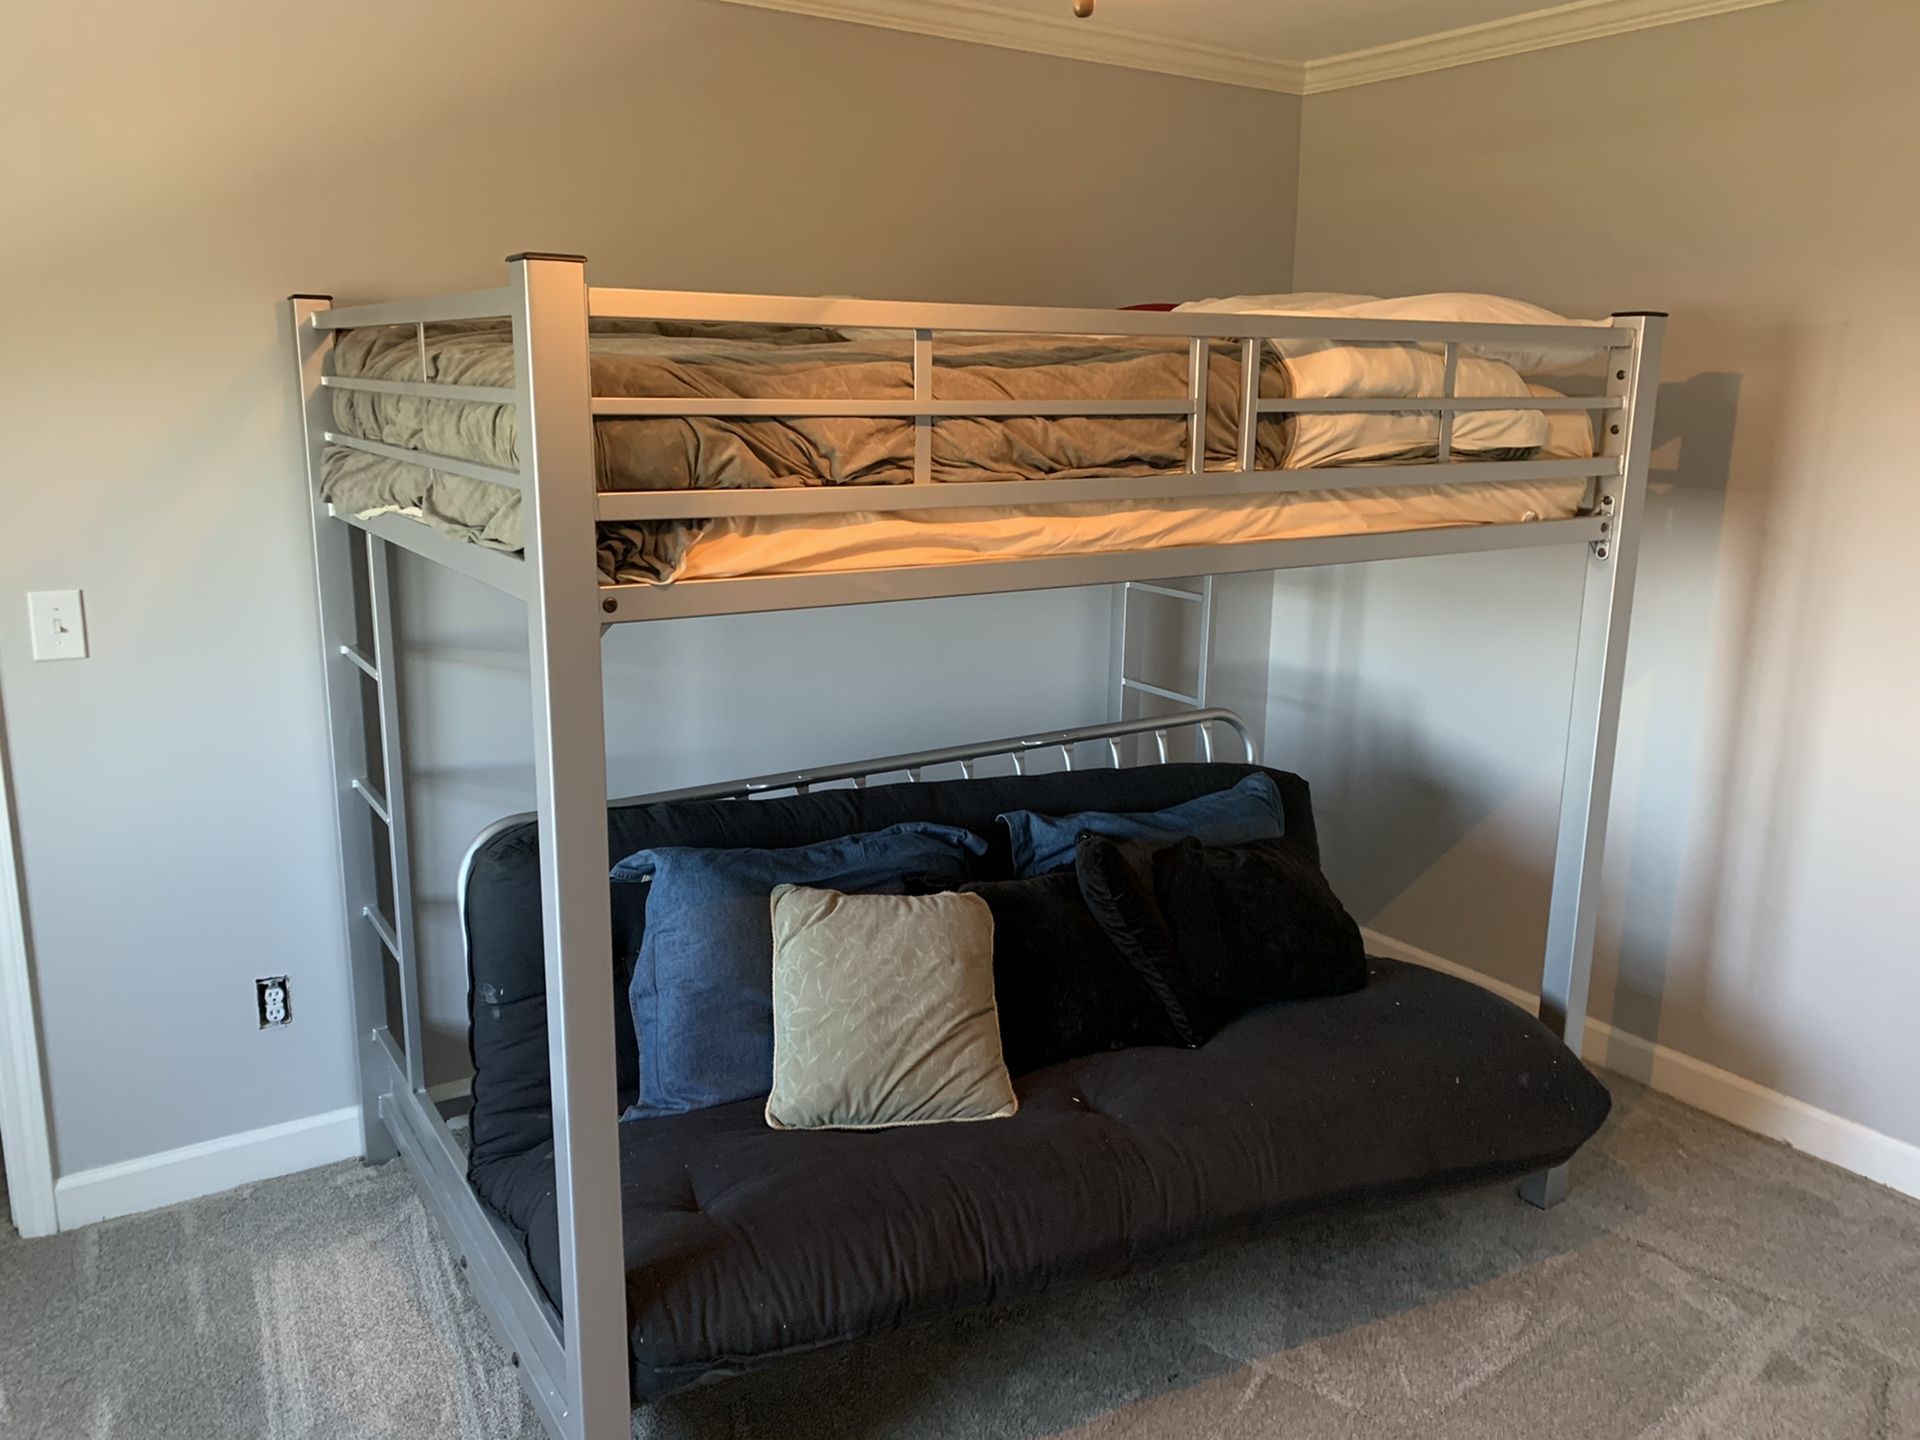 Steel bunk bed / futon combo. Mattresses included